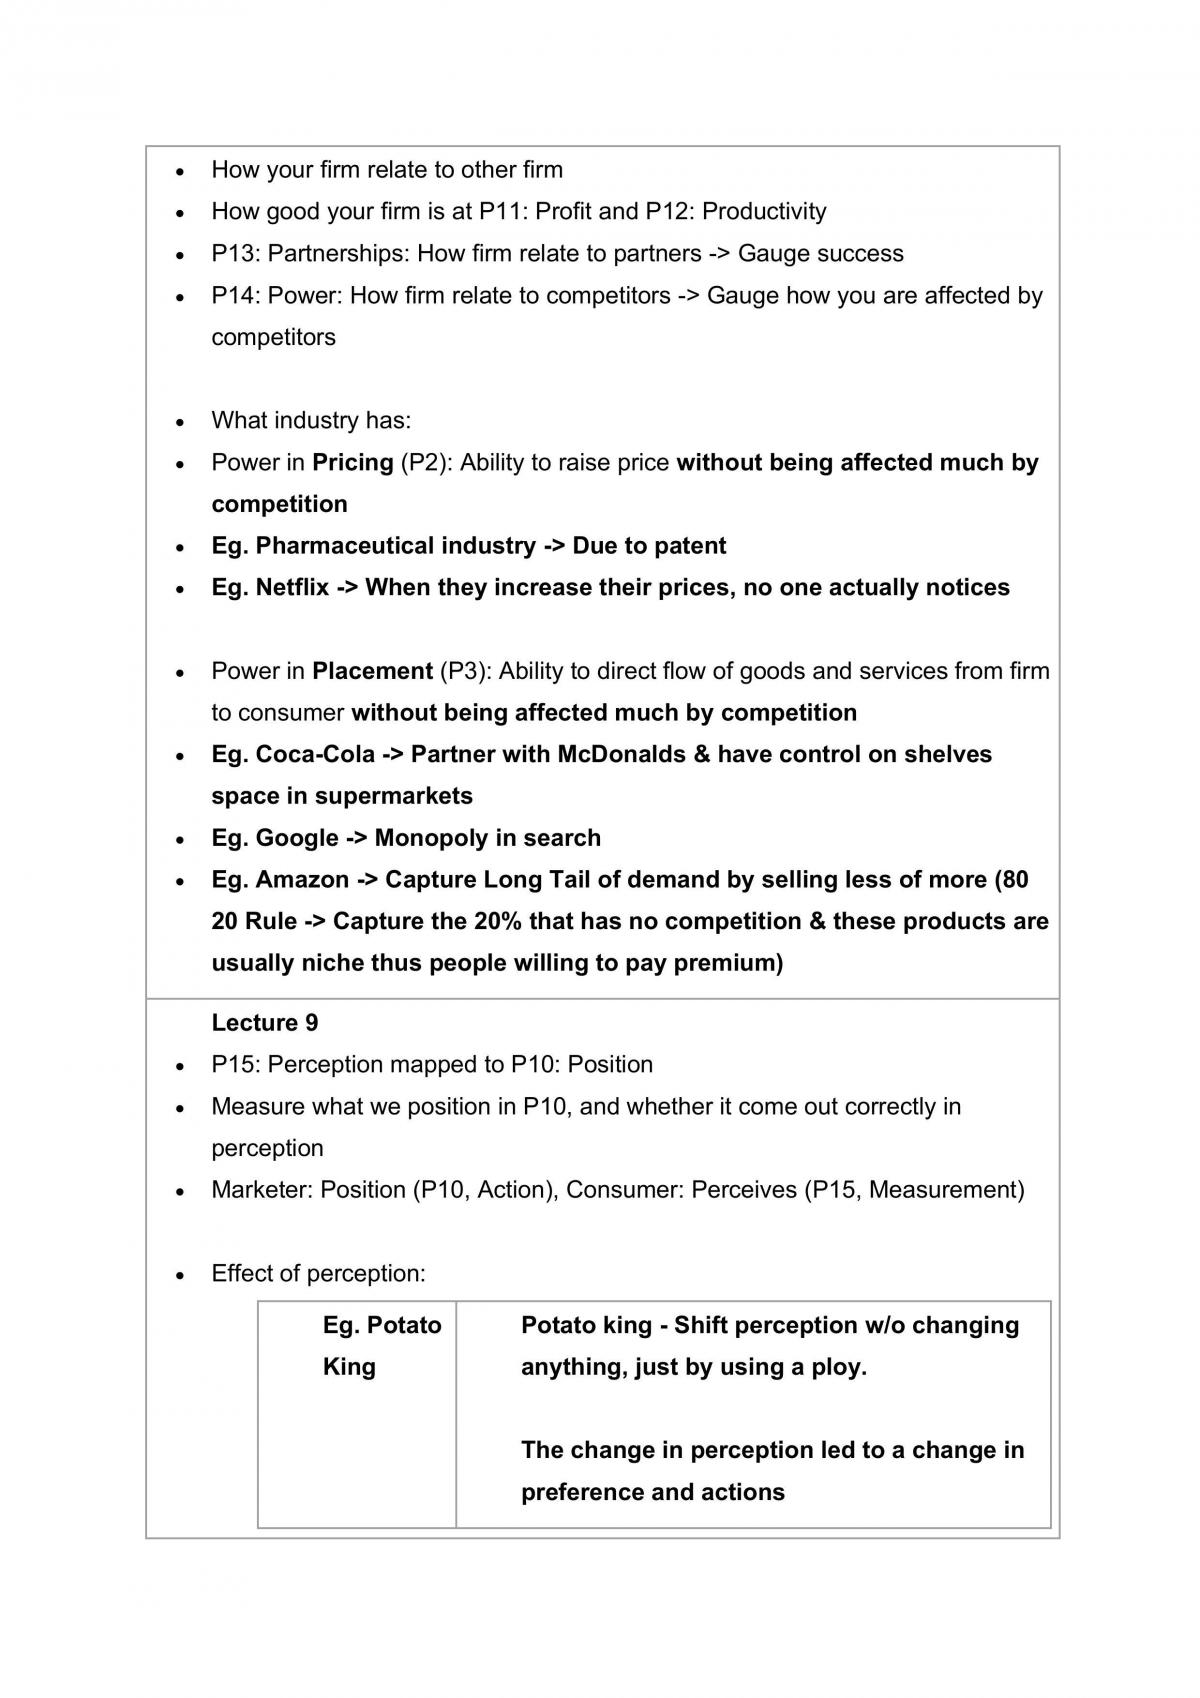 MKT3701 Summary Notes - Page 18